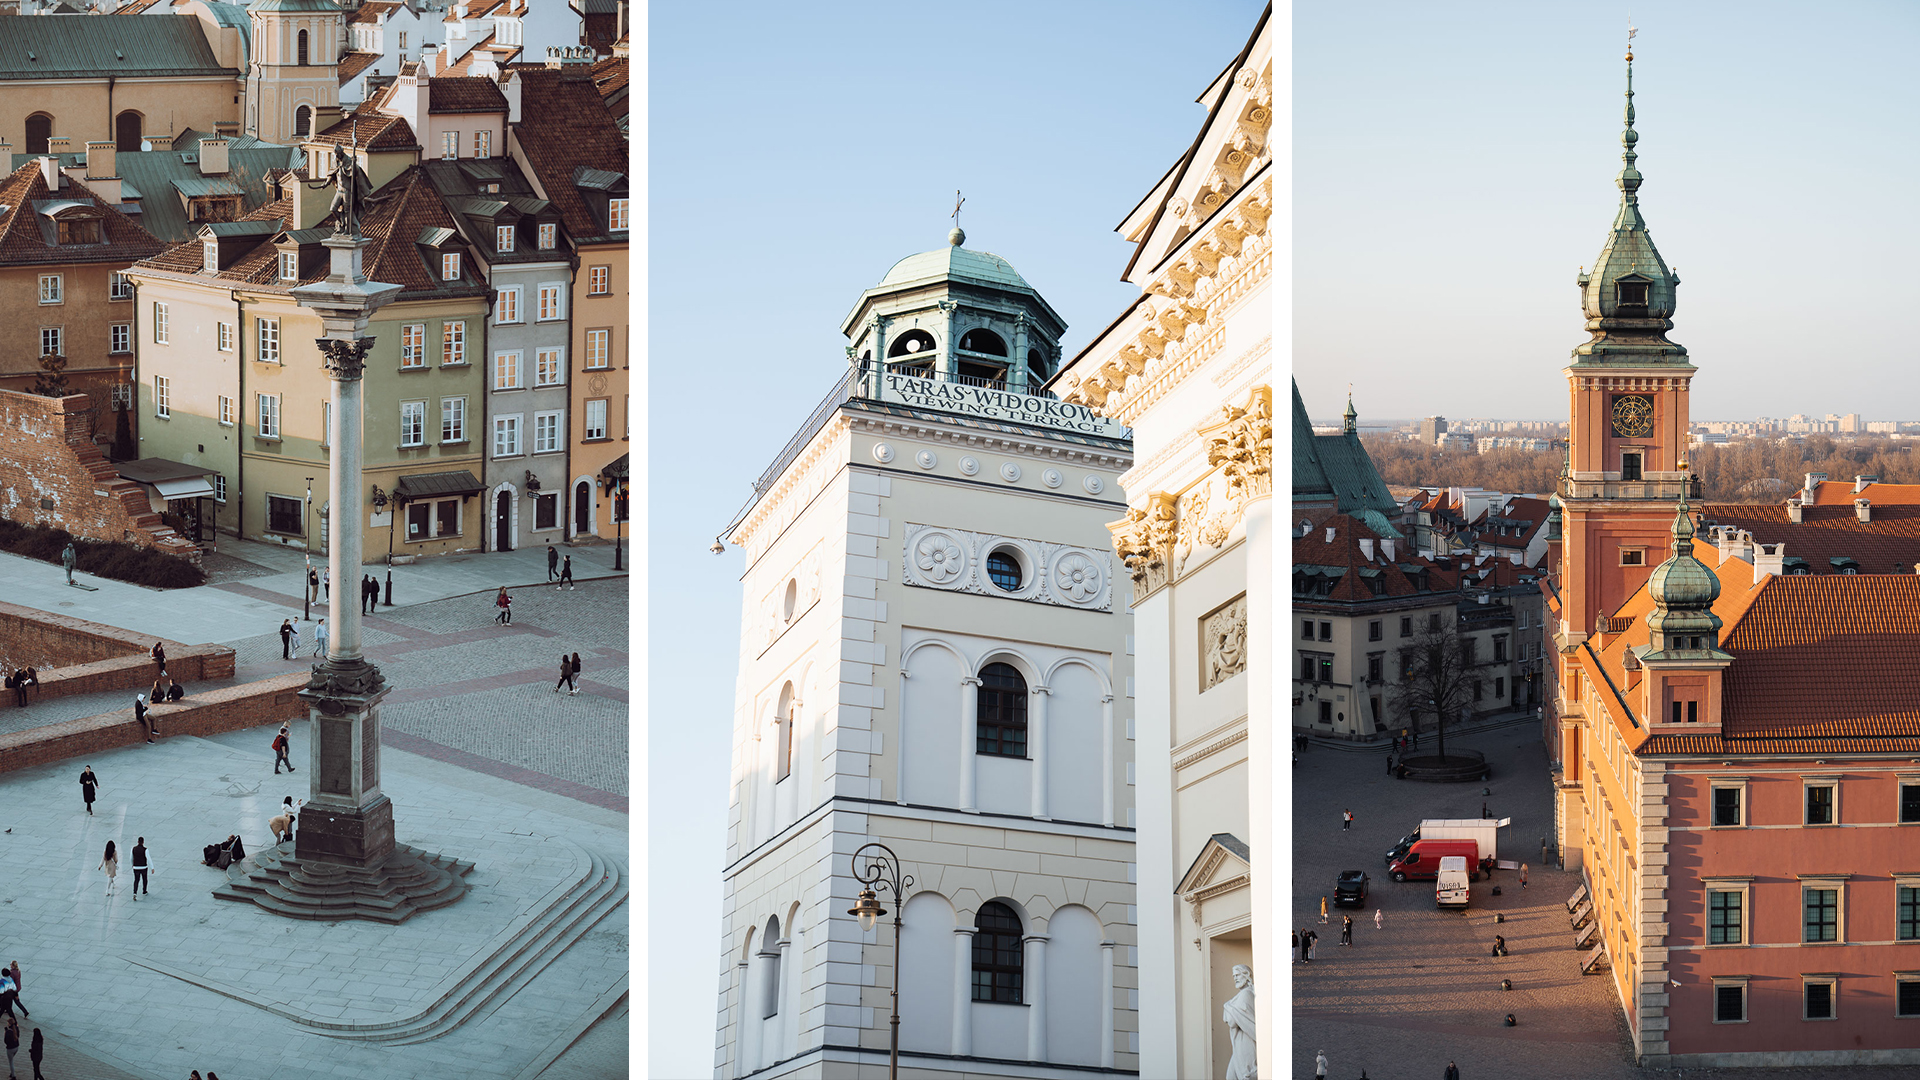 Three vertical photos in one picture, all taken from the viewing terrace on the bell tower of St. Anne's Church in Warsaw, Poland. On the left picture, we see Sigismund's Column on Castle Square from above. In the middle, we see the bell tower itself from the bottom, with a sign saying "Viewing Terrace" on the top floor, welcoming tourists. On the right photo, there is a view of the Royal Castle with the Old Town in the background, showered in golden light.